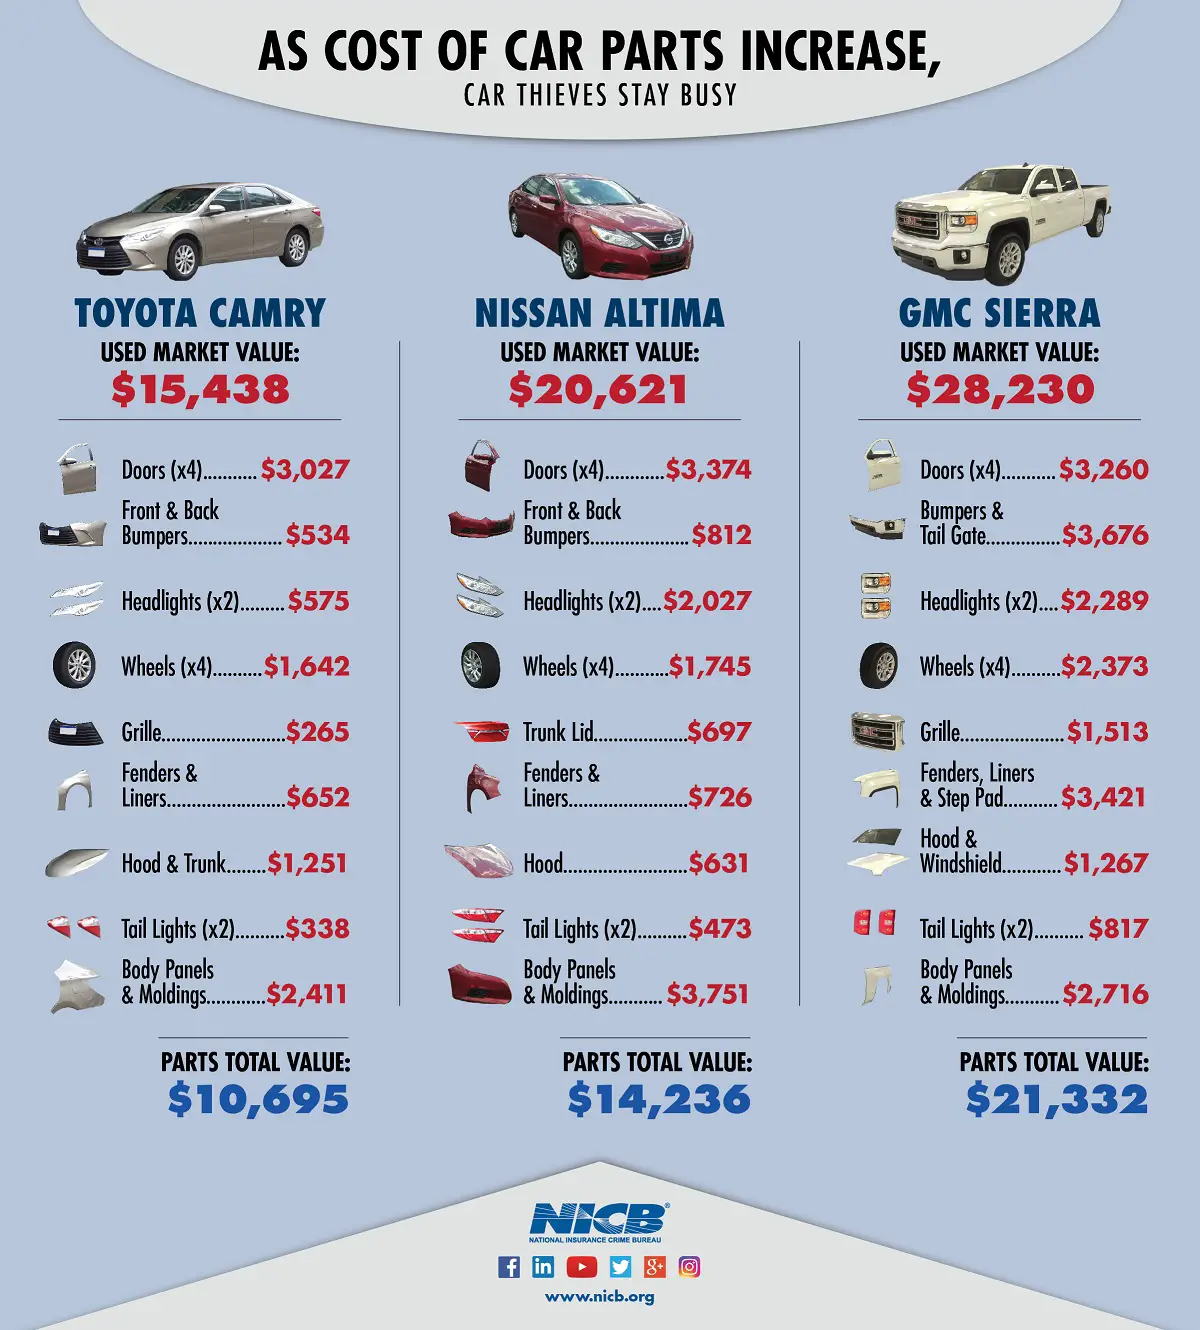 See How Much Car Thieves Make Selling Your Car for Parts